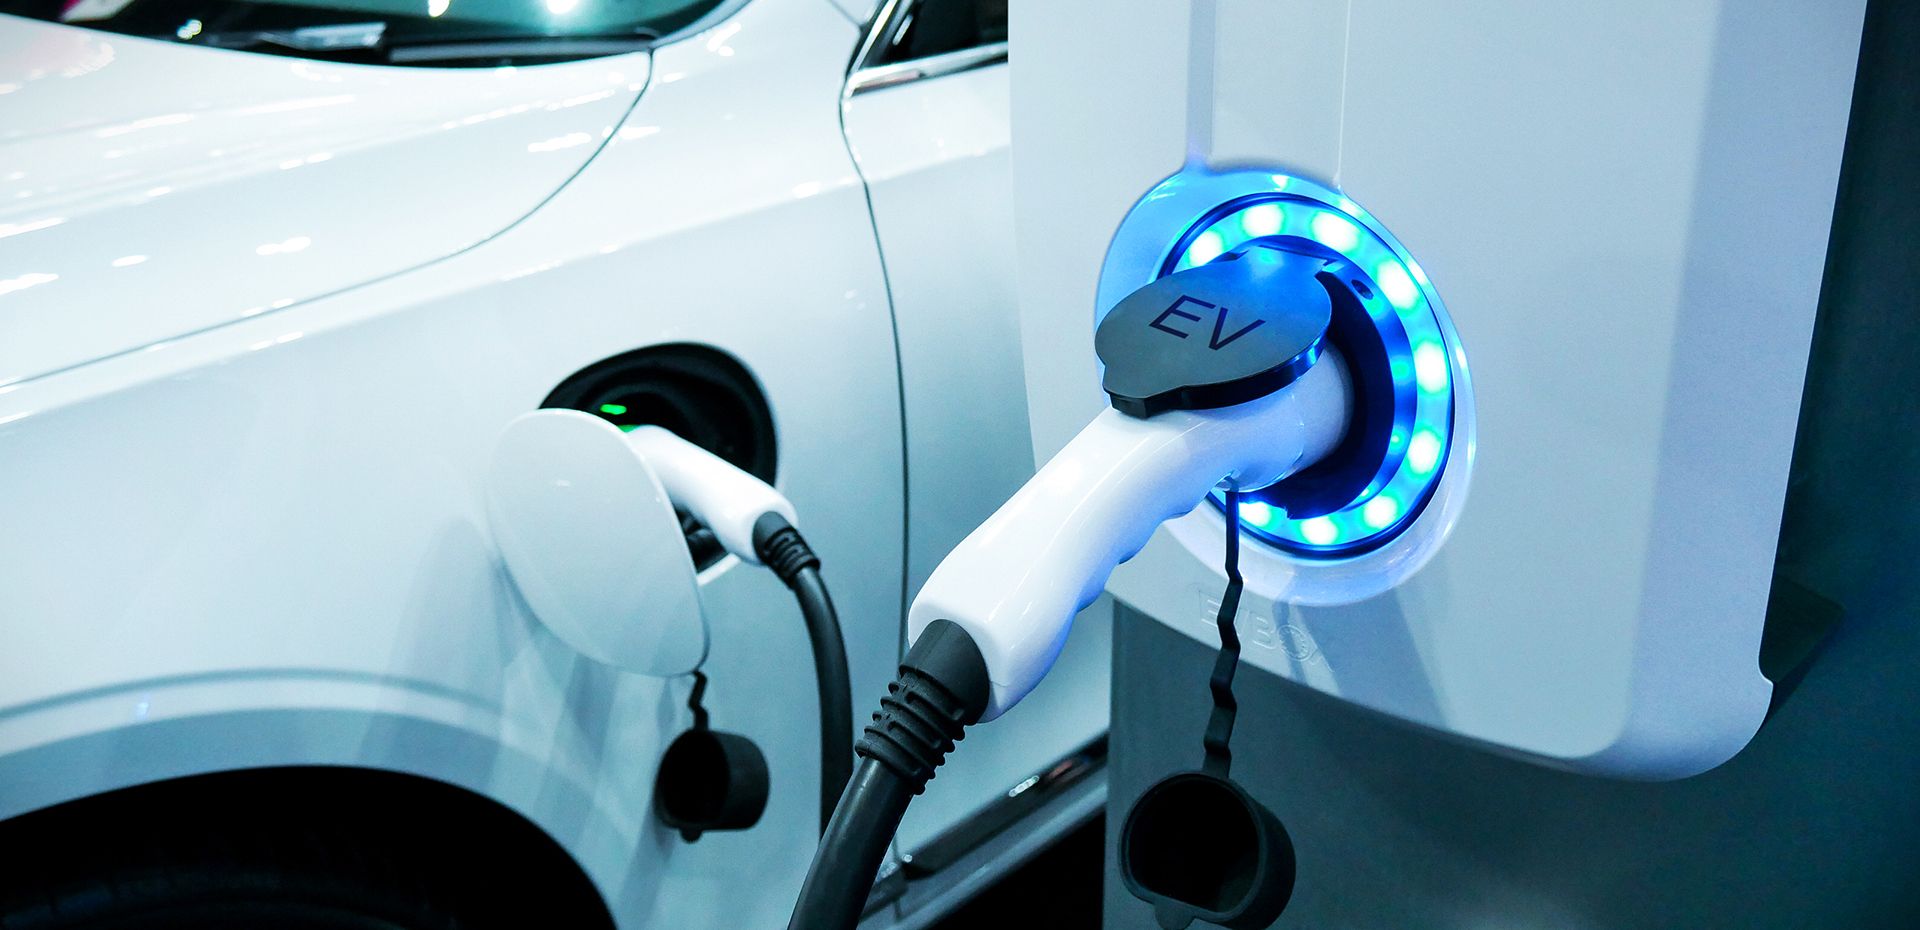 Mass production and delivery delays – common challenges facing China EV startups